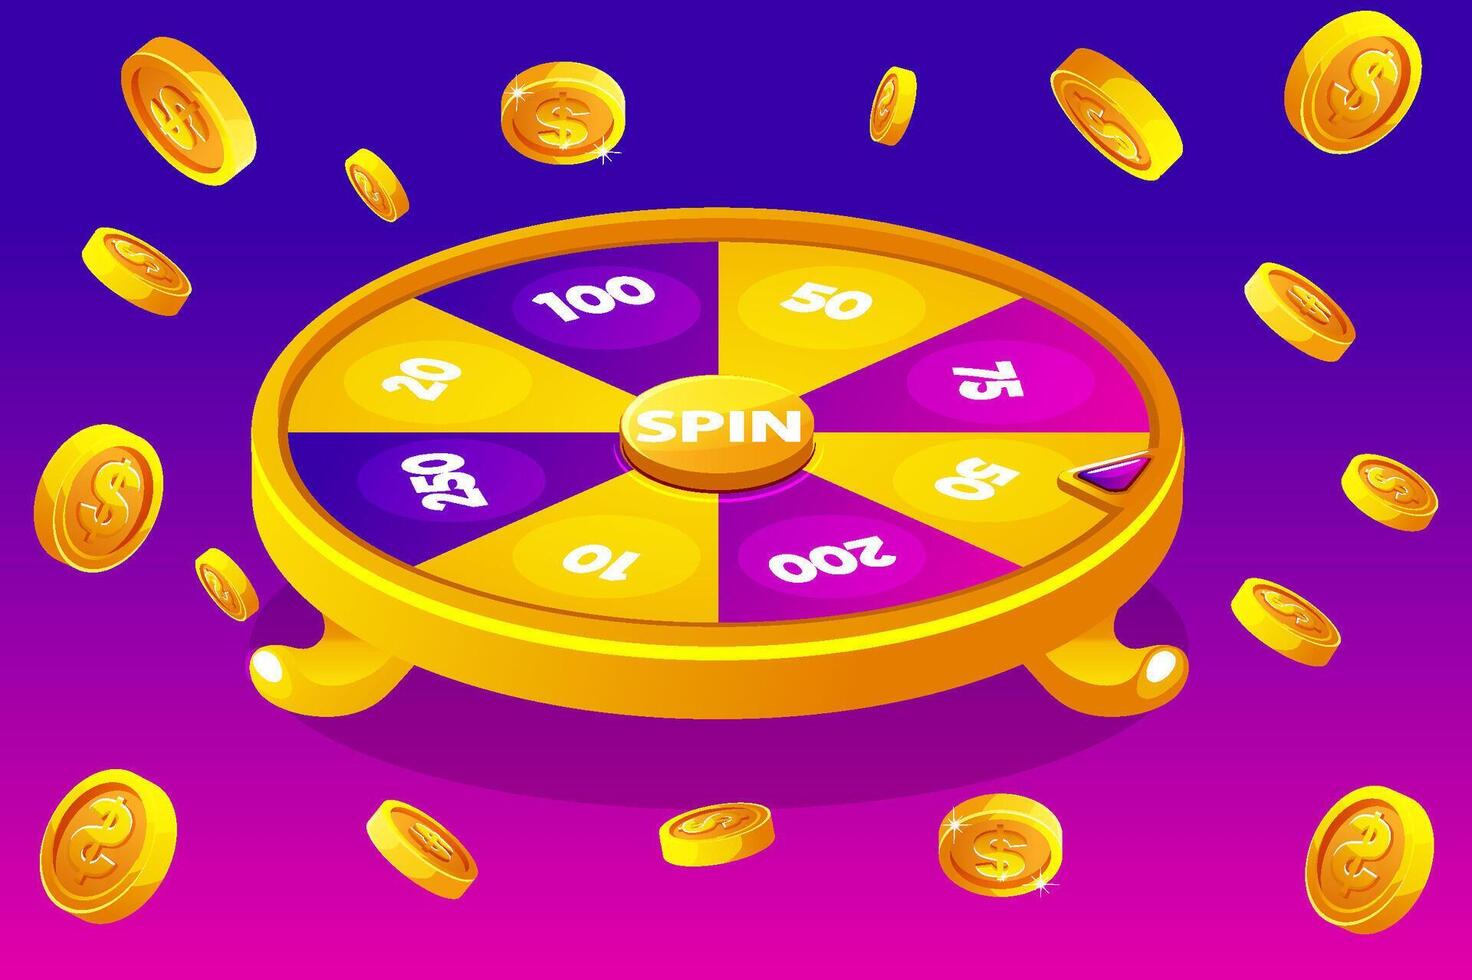 Wheel of fortune for the casino. Background with explosion coins. vector